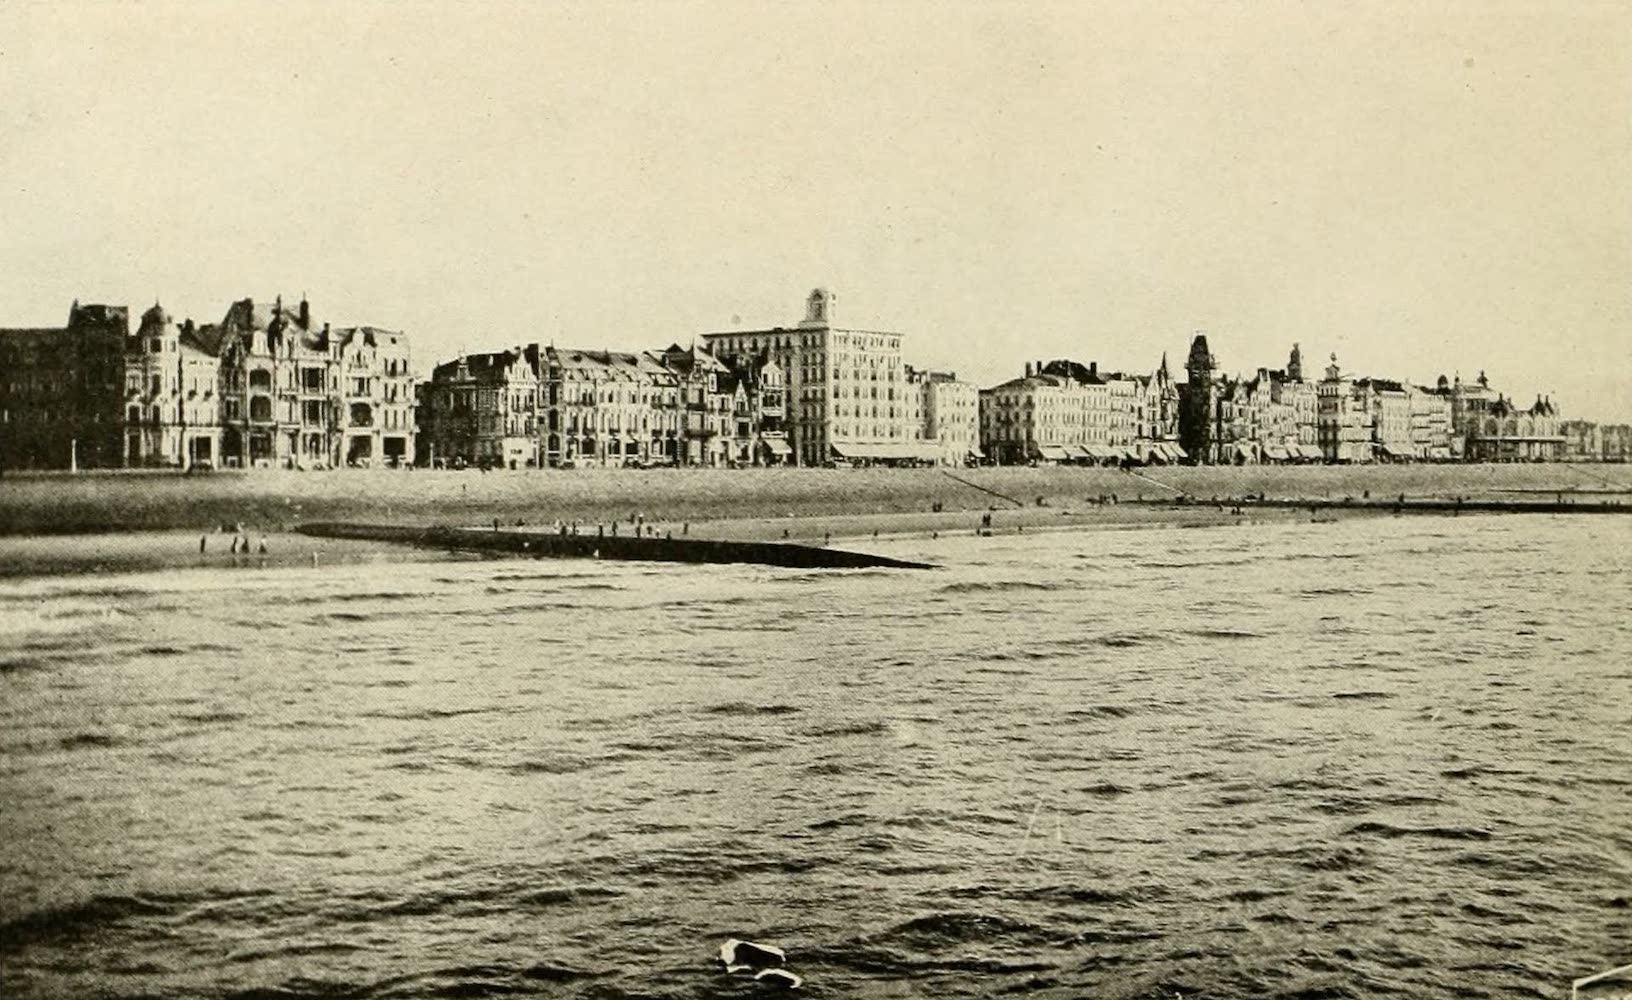 Laird & Lee's World's War Glimpses - Ostend, Famous Belgian Watering Place (1914)